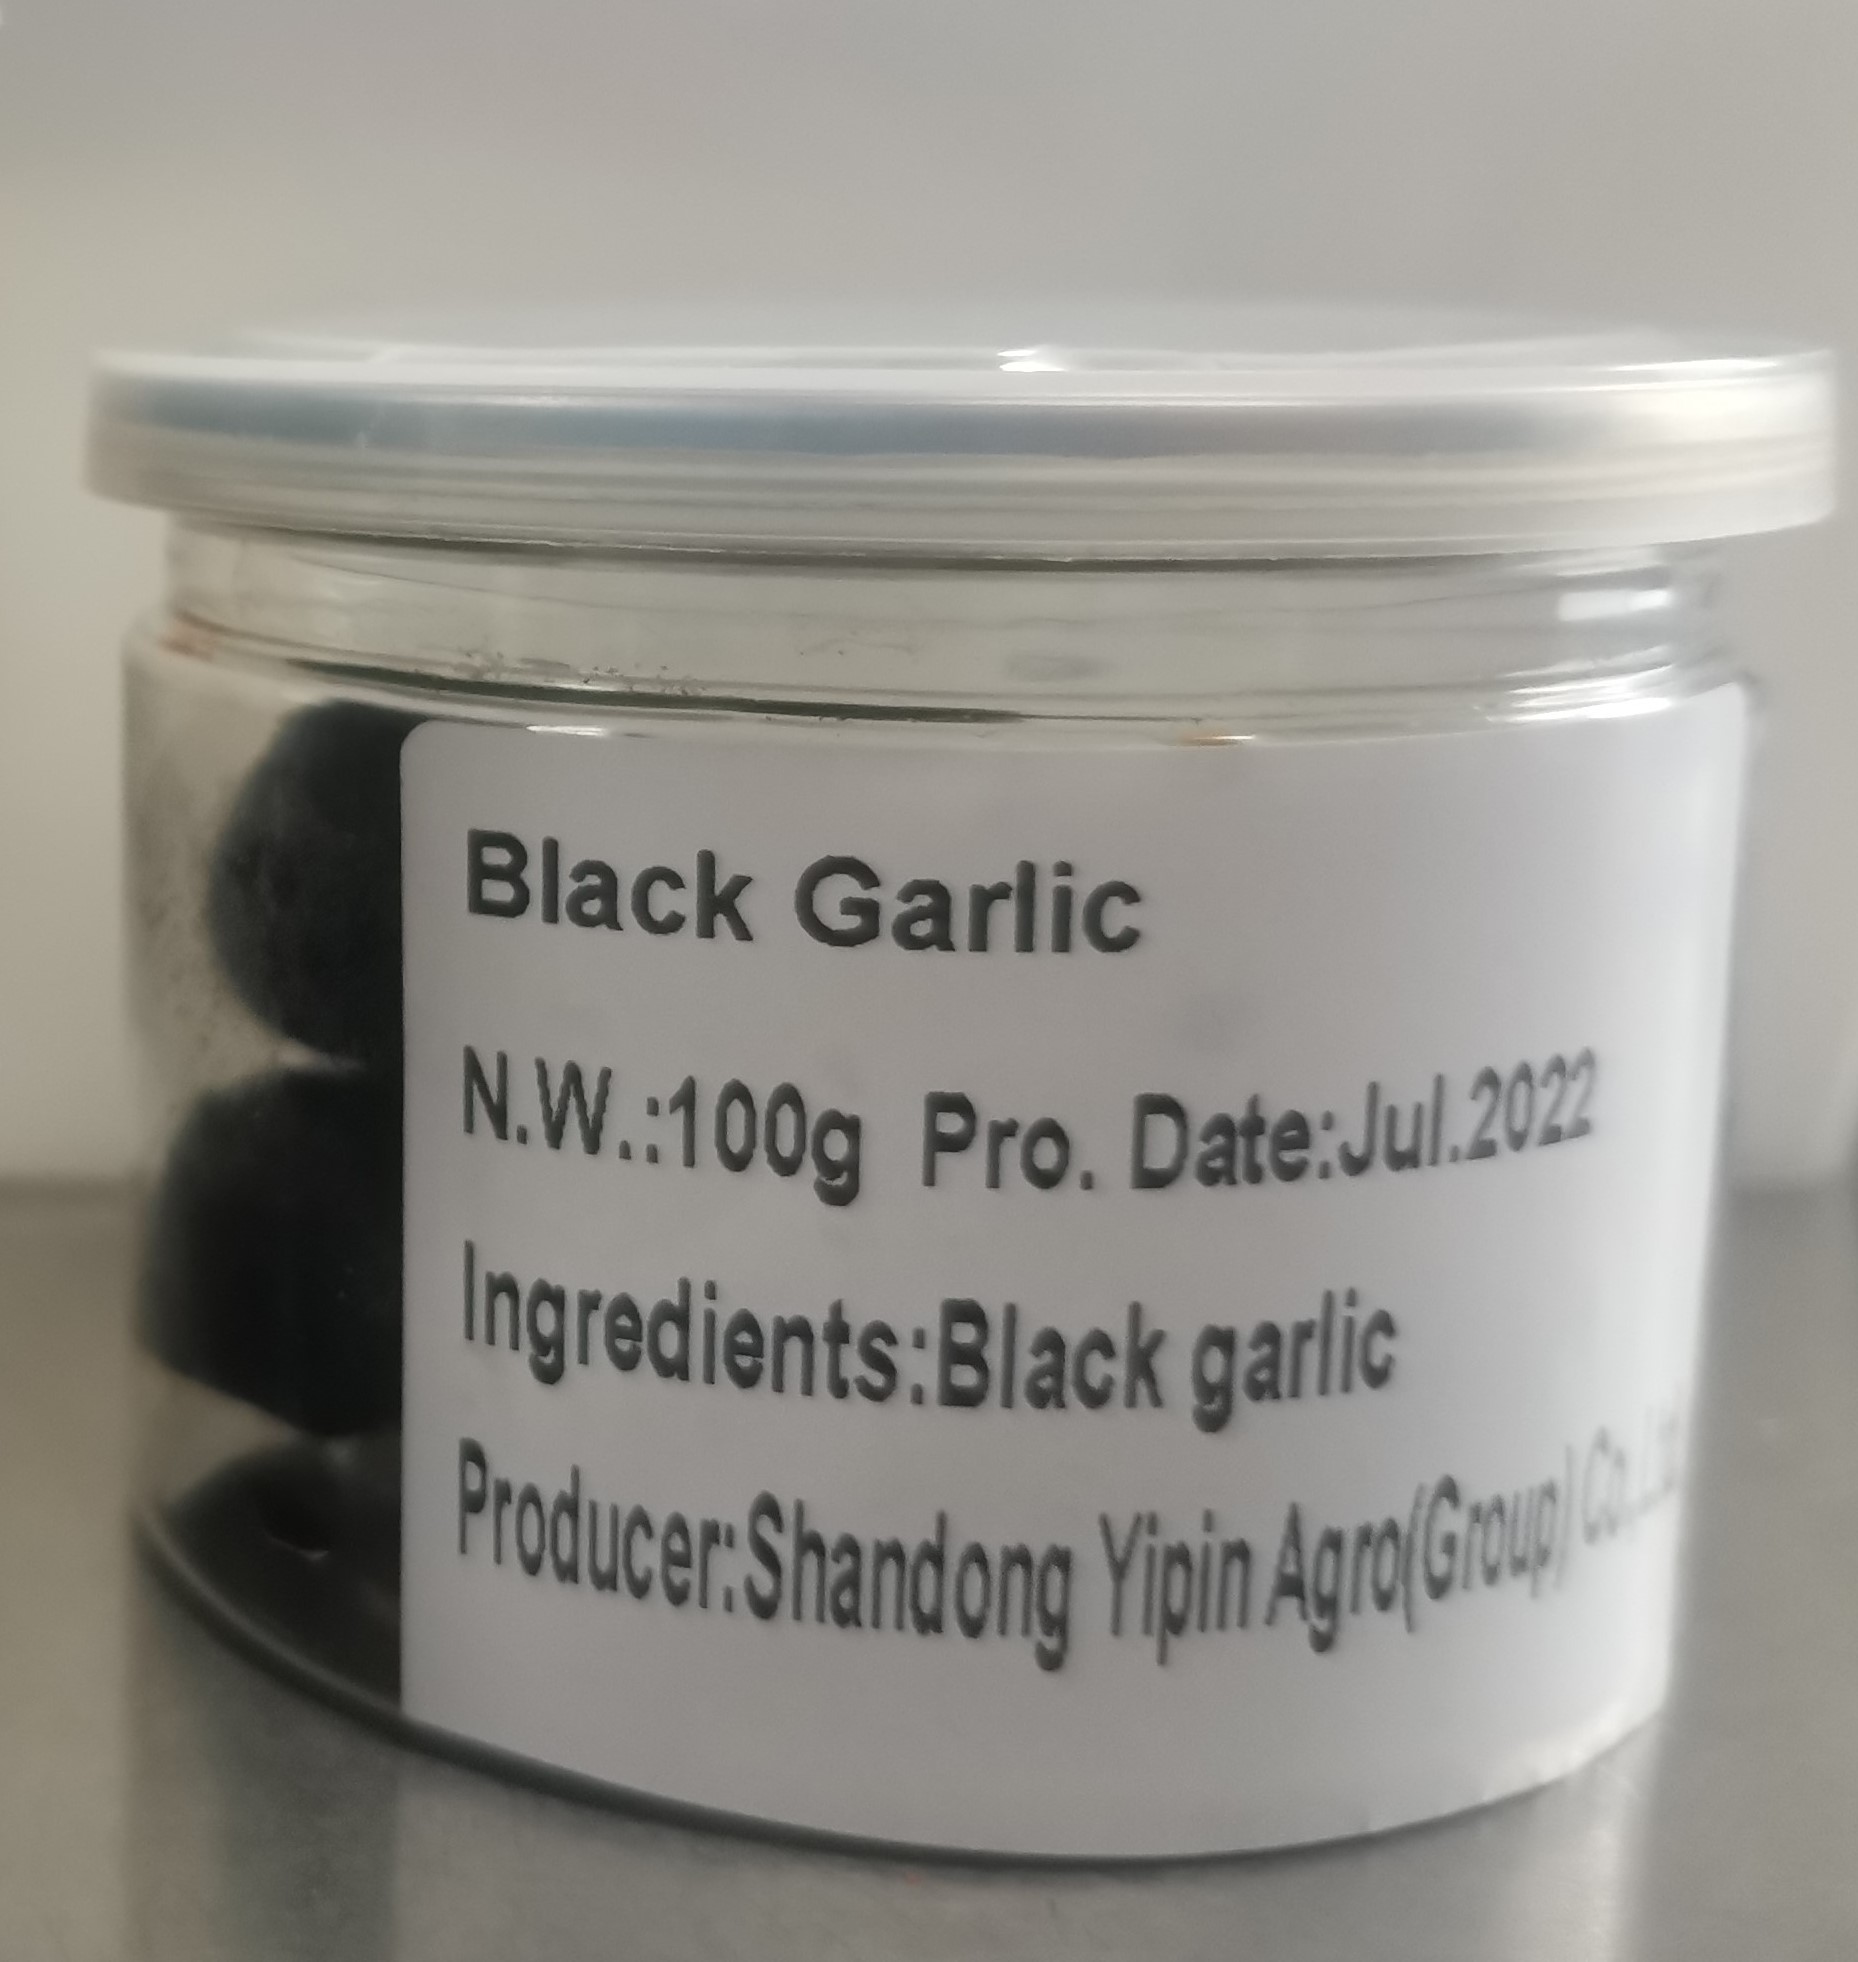 At Home Canned Black Garlic Fermented Pastes And Sauces